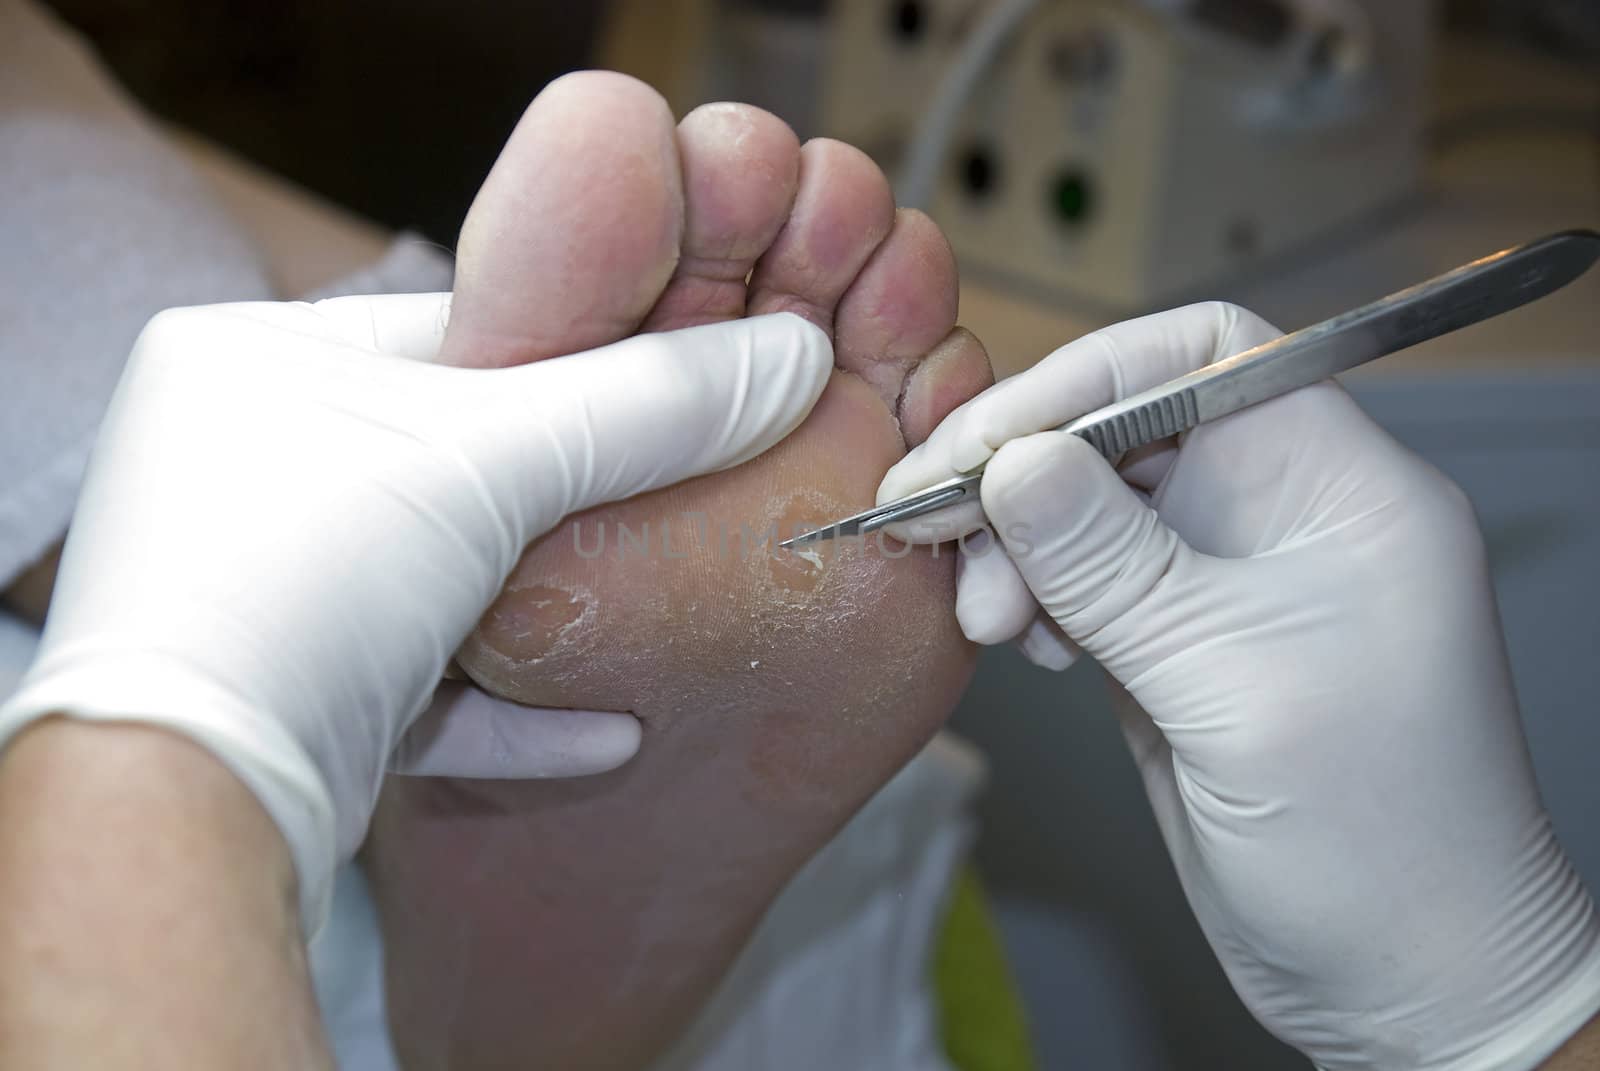 A pedicure removing hard skin with a knife from a client's feet